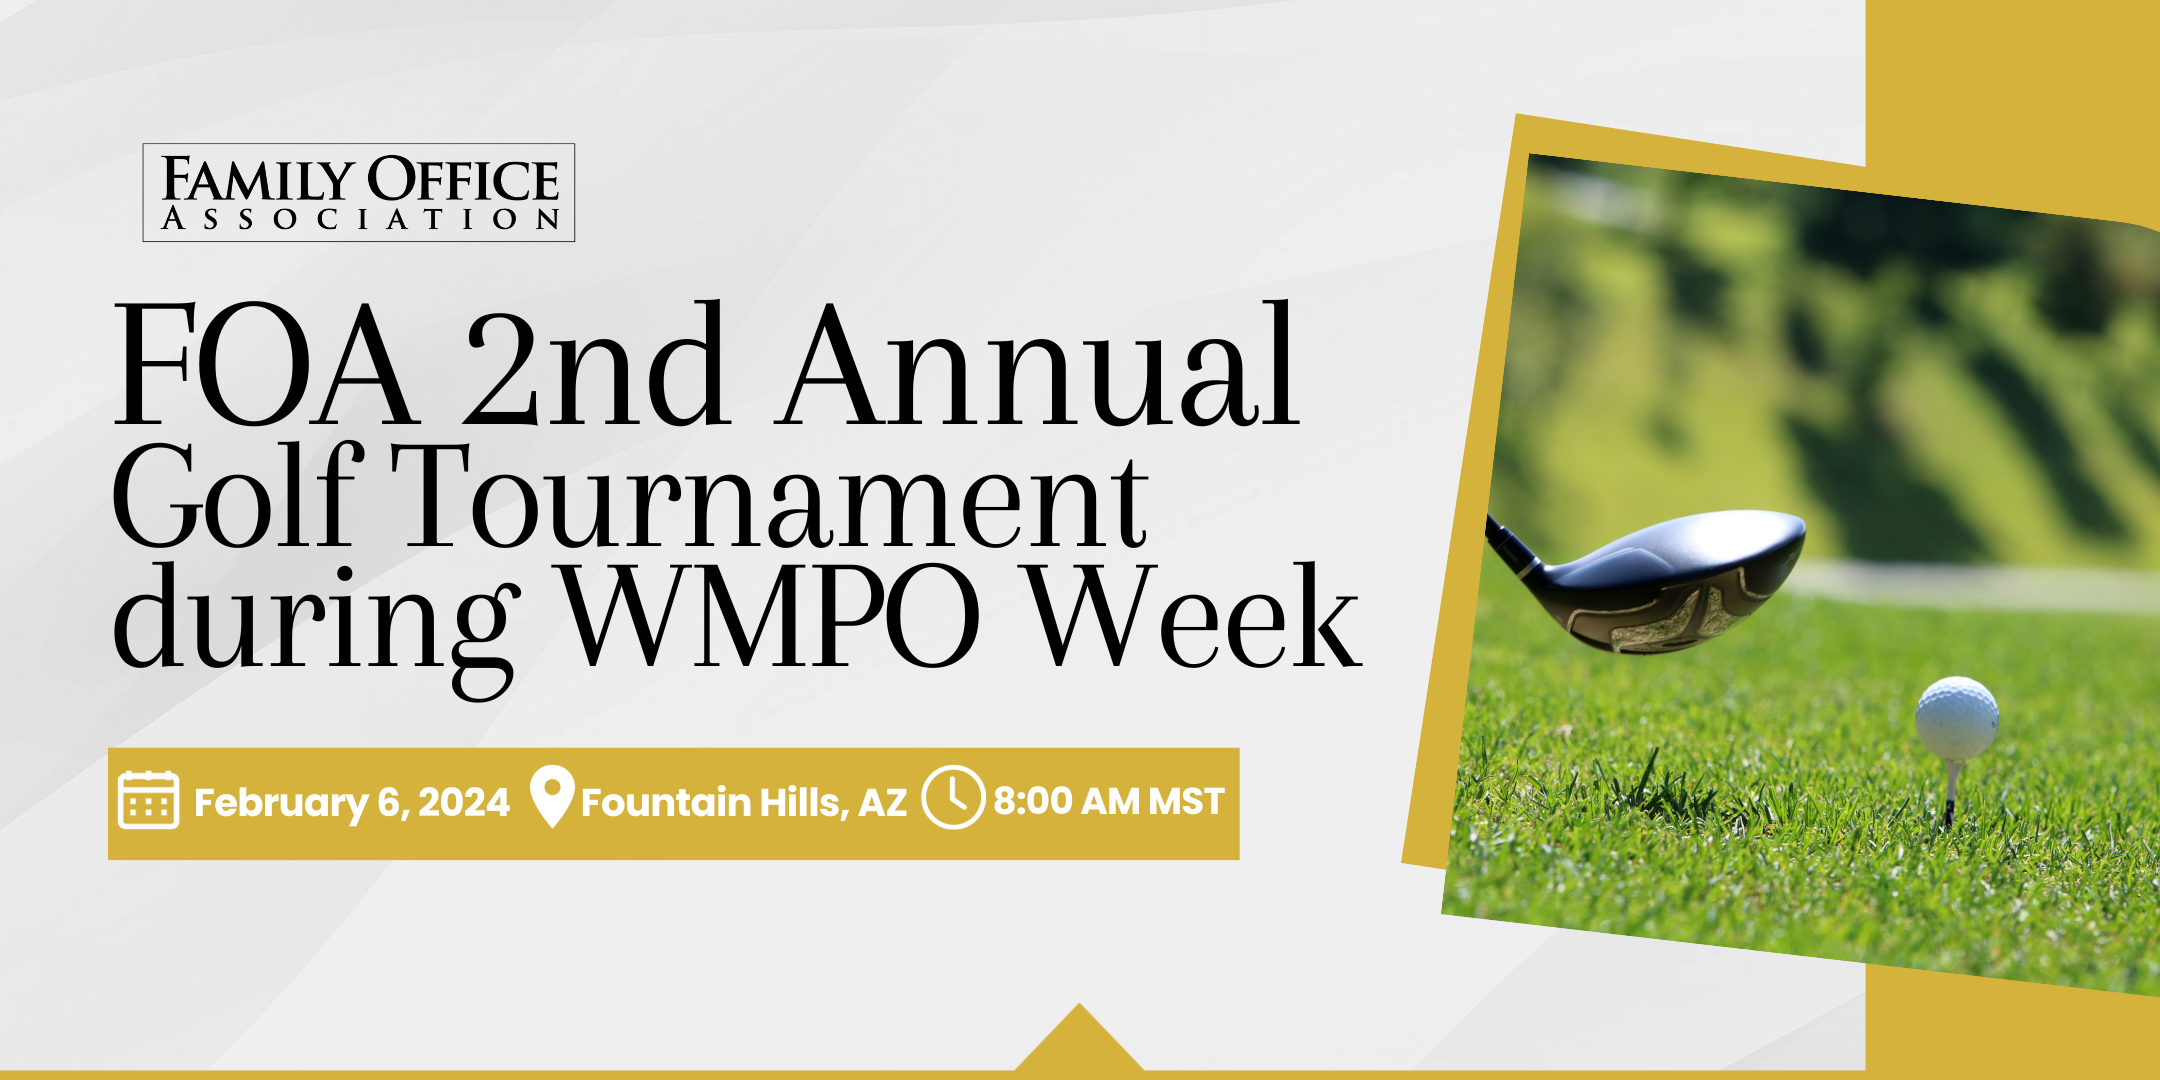 FOA 2nd Annual Golf Tournament during WMPO Week!